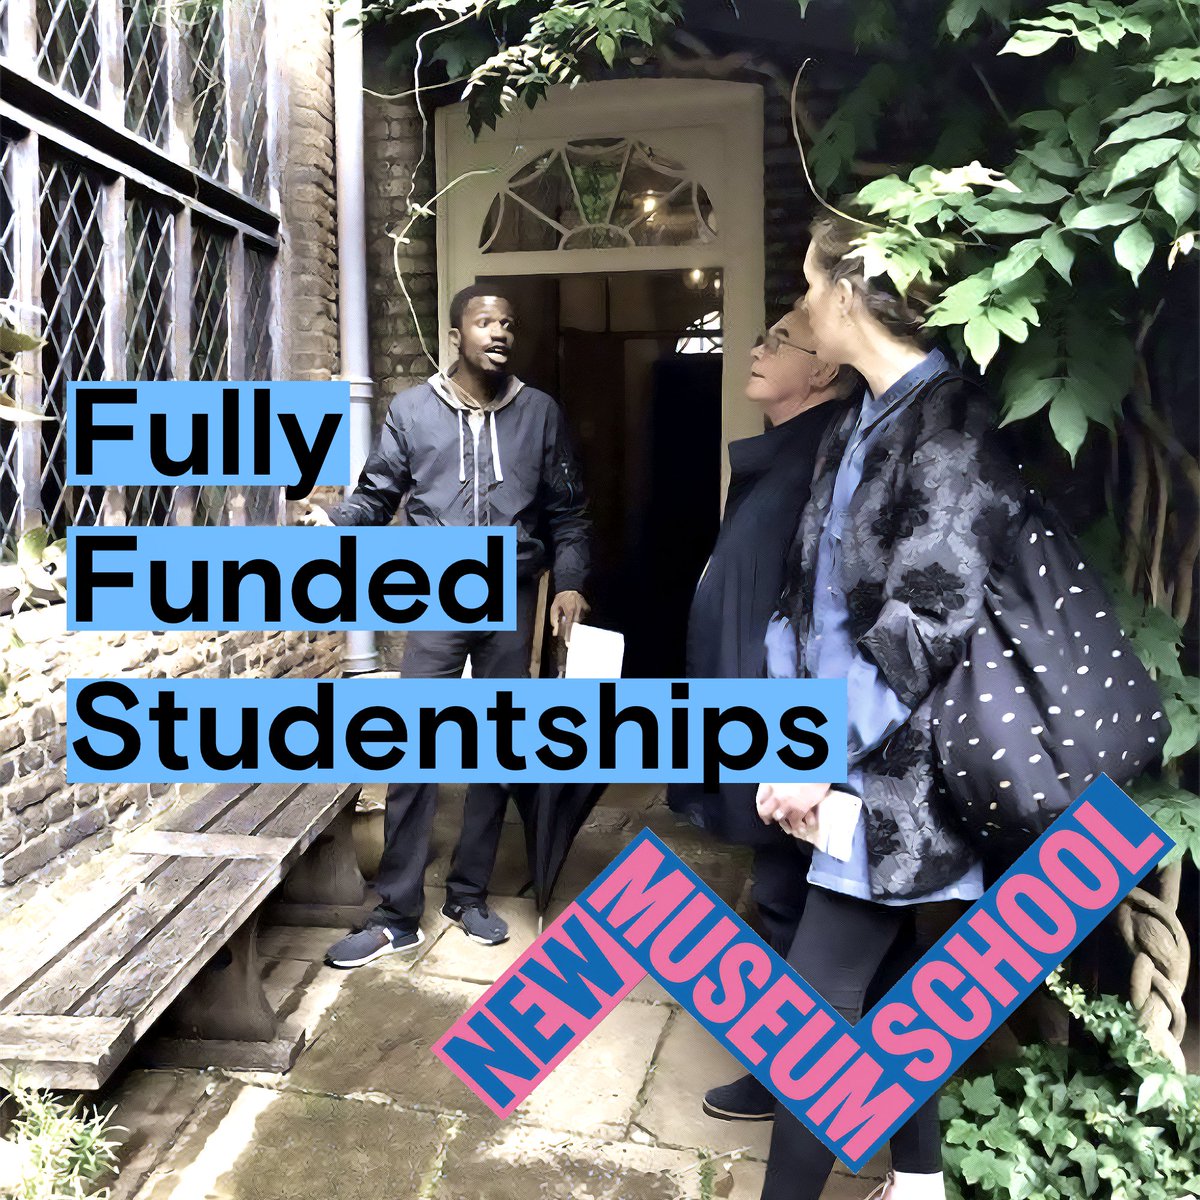 We are delighted to be partnering with the @uniofleicester School of Museum Studies to offer fully funded studentships for people from underrepresented backgrounds in PGDip and MA pathways in Socially Engaged Practice and Museum Studies.